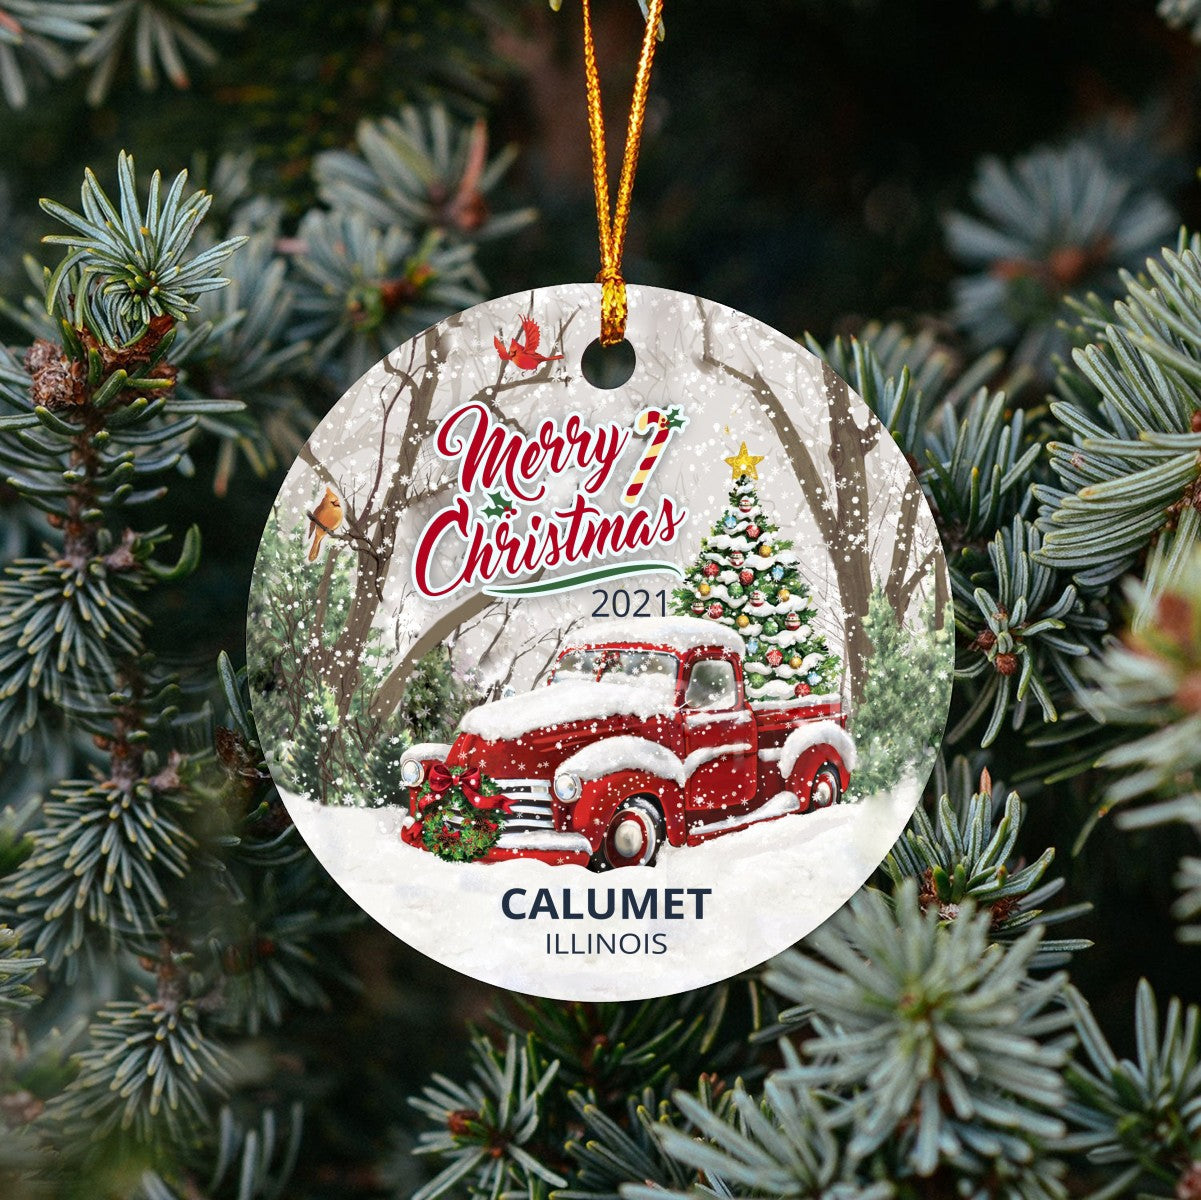 Christmas Tree Ornaments Calumet - Ornament Customize With Name City And State Calumet Illinois IL - Red Truck Xmas Ornaments 3'' Plastic Gift For Family, Friend And Housewarming